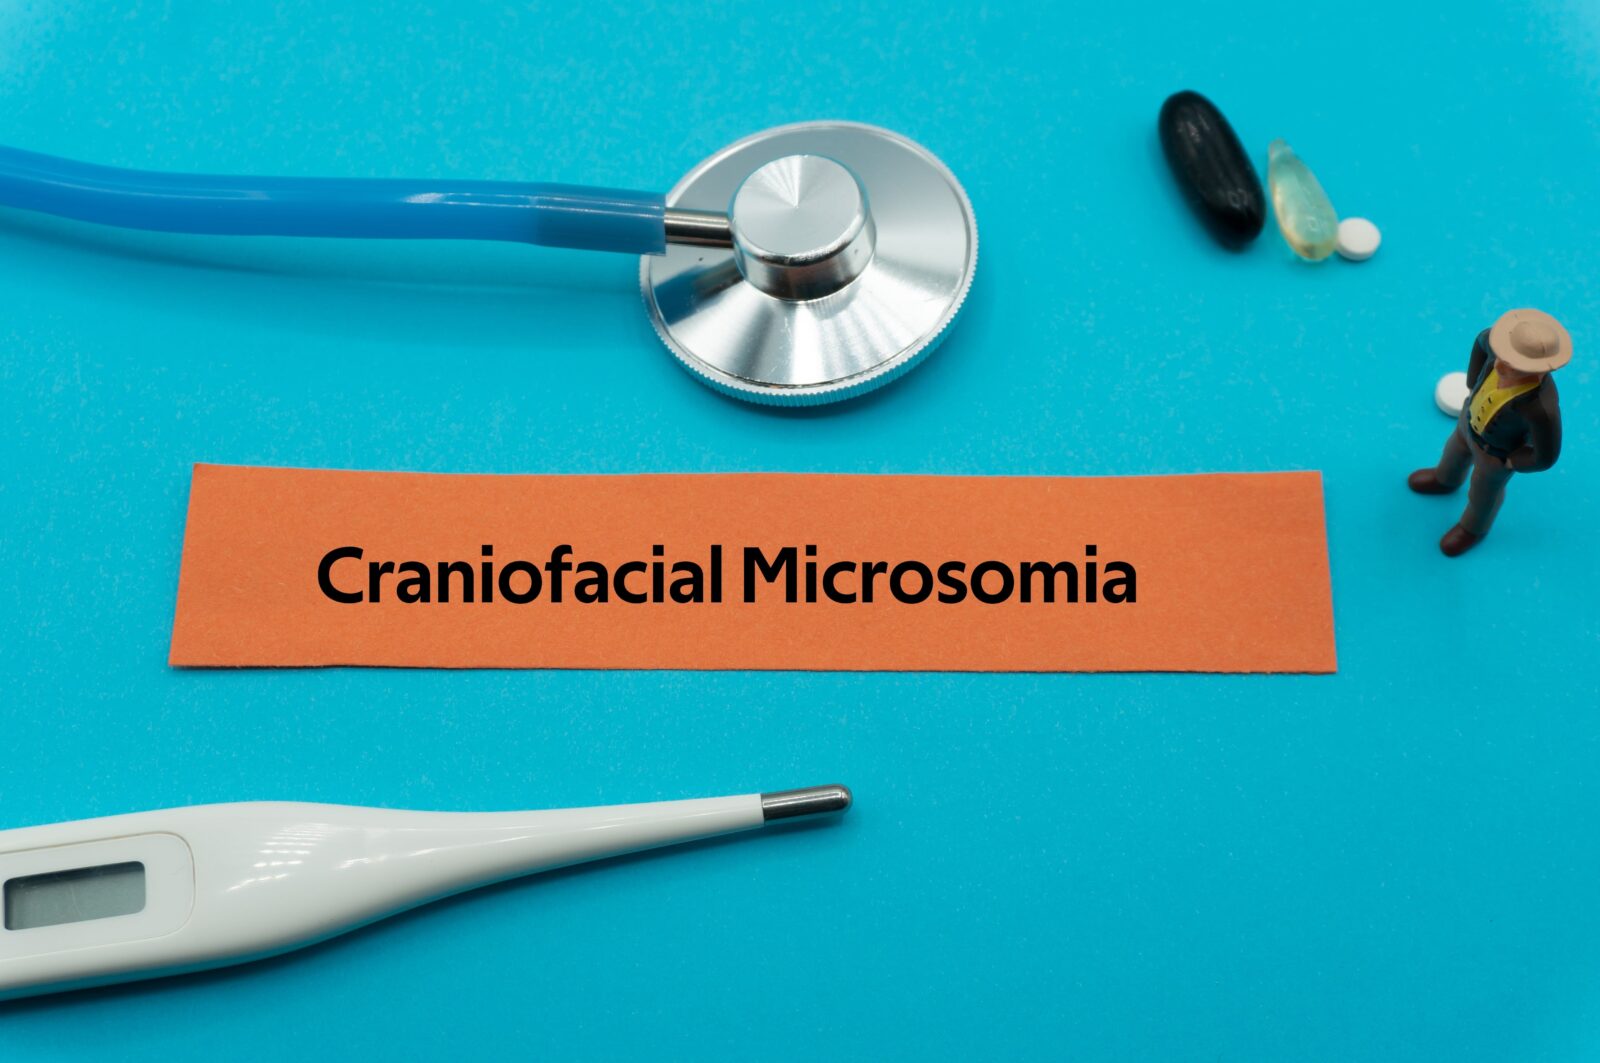 Craniofacial Microsomia.The word is written on a slip of colored paper. health terms, health care words, medical terminology. wellness Buzzwords. disease acronyms.